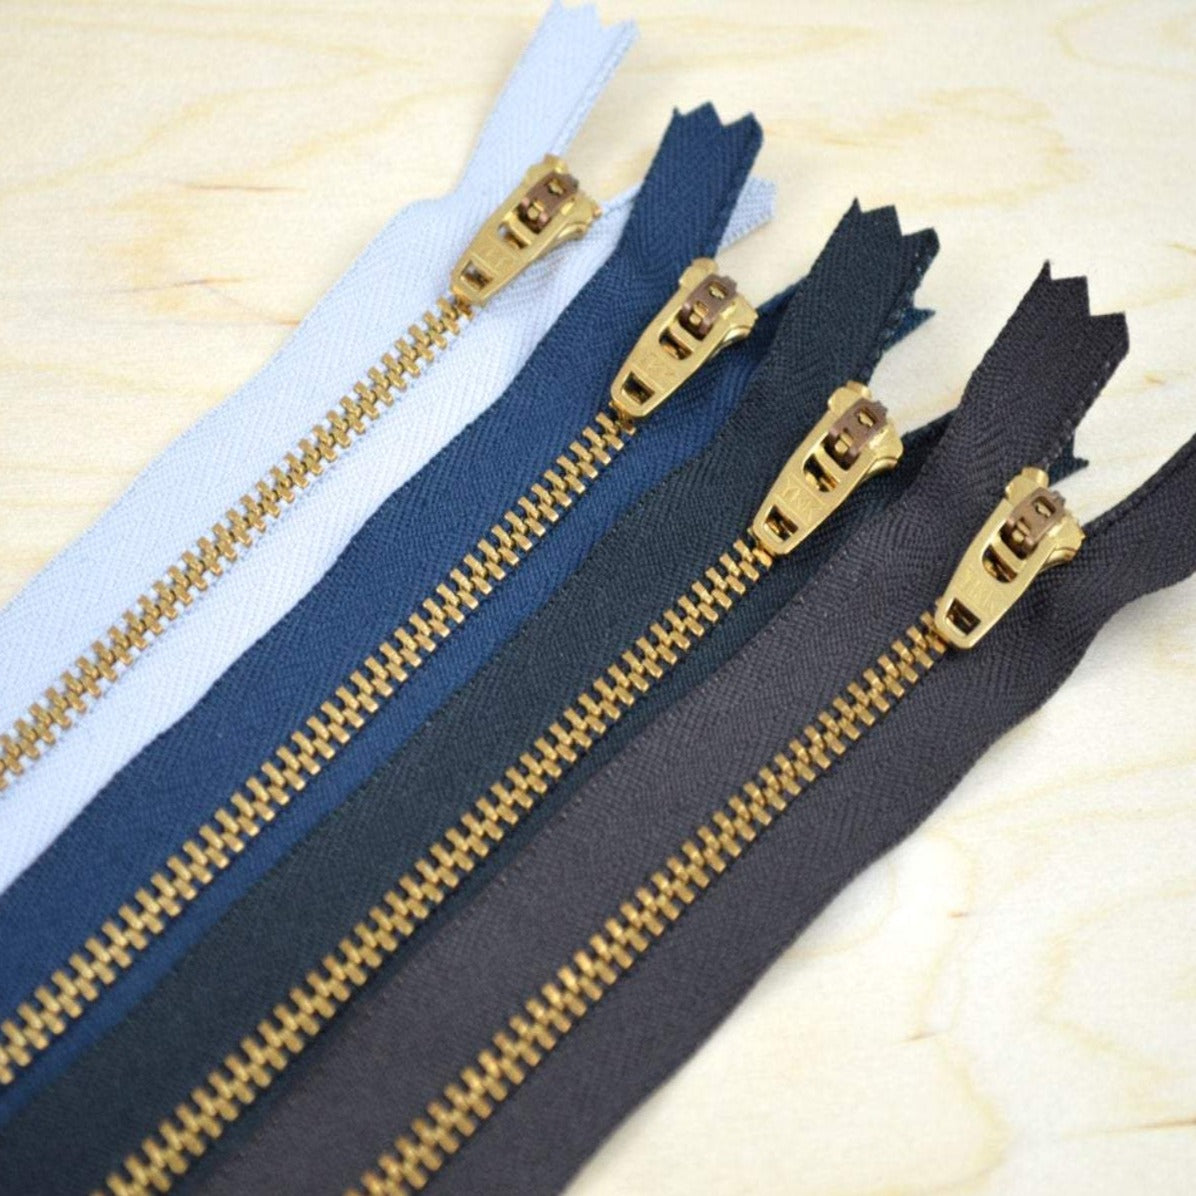 3 Pieces 9" Authentic YKK Gold Metal Zippers 45U- Made in USA